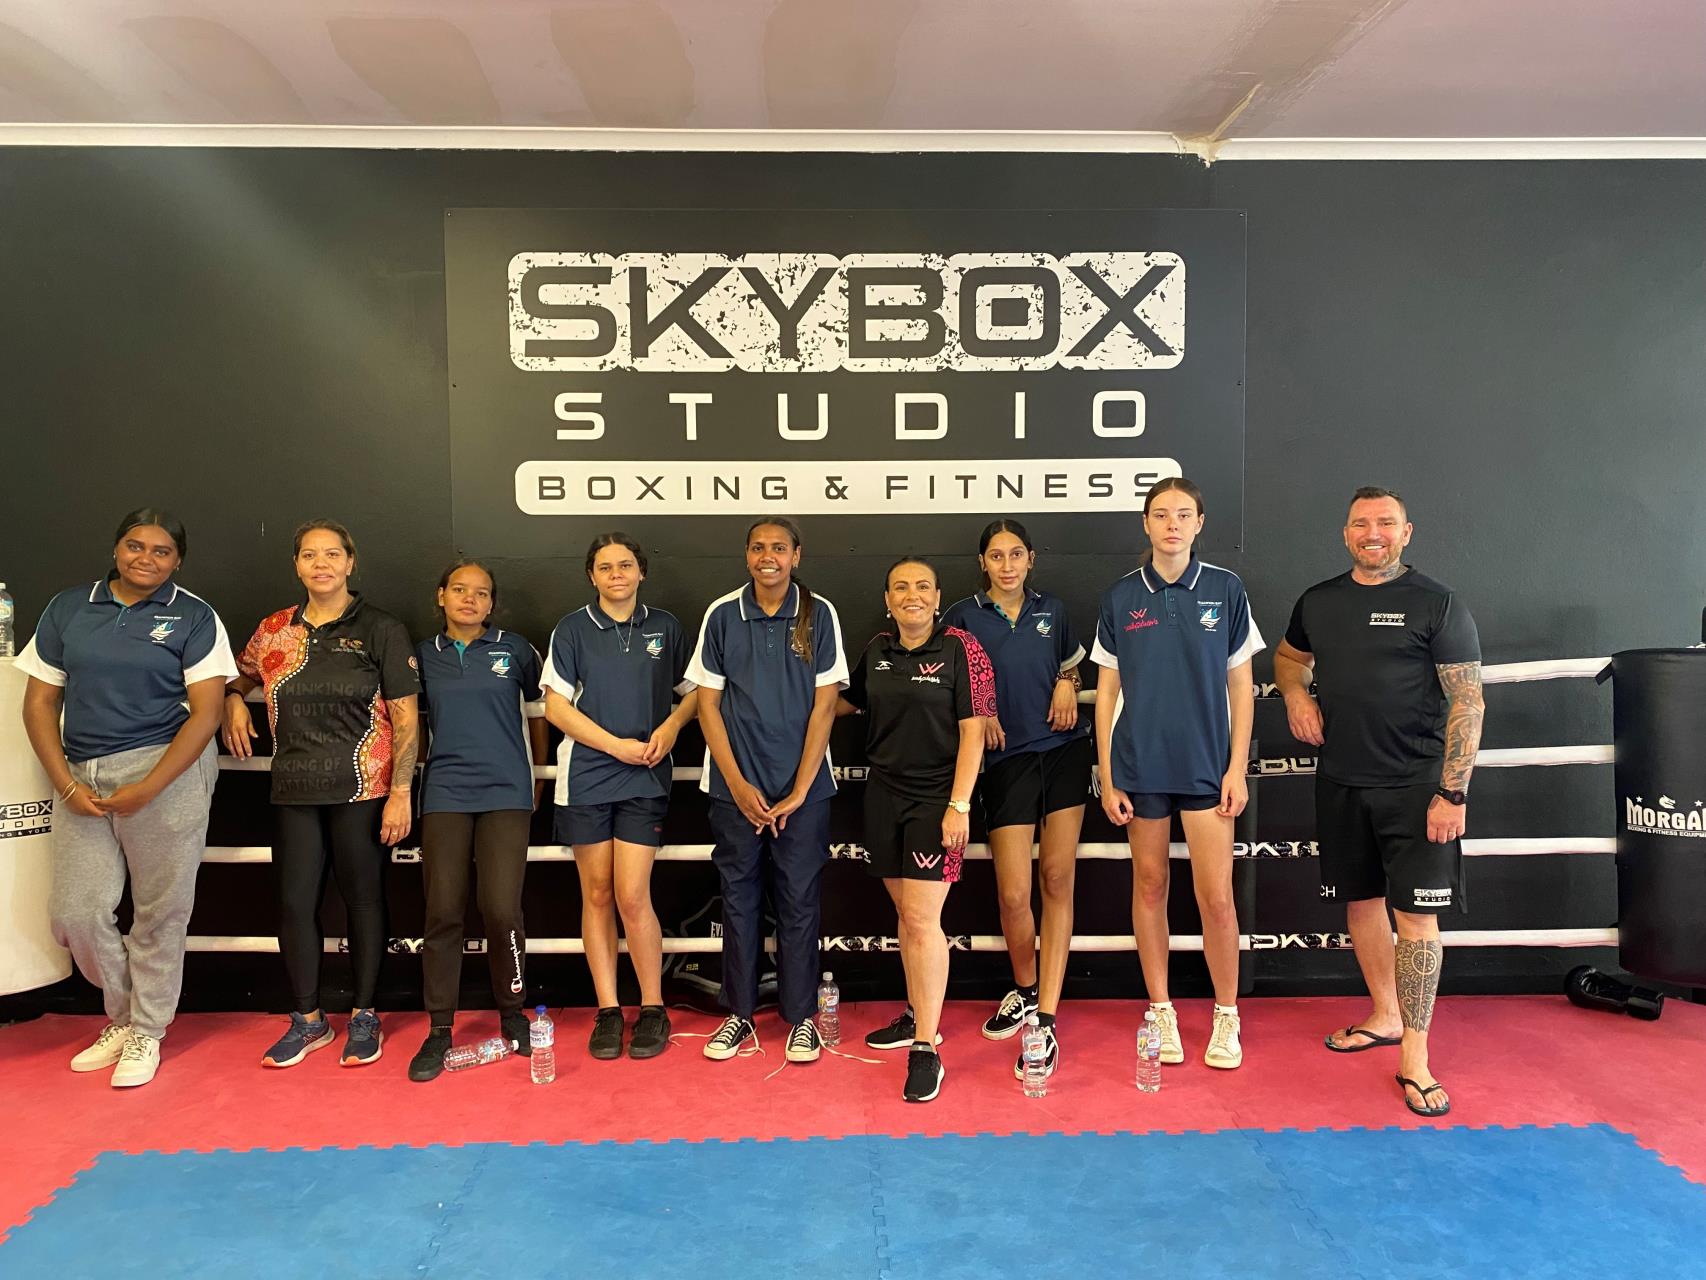 TIS team up with Sky Box Studio to deliver a four-week boxing program for